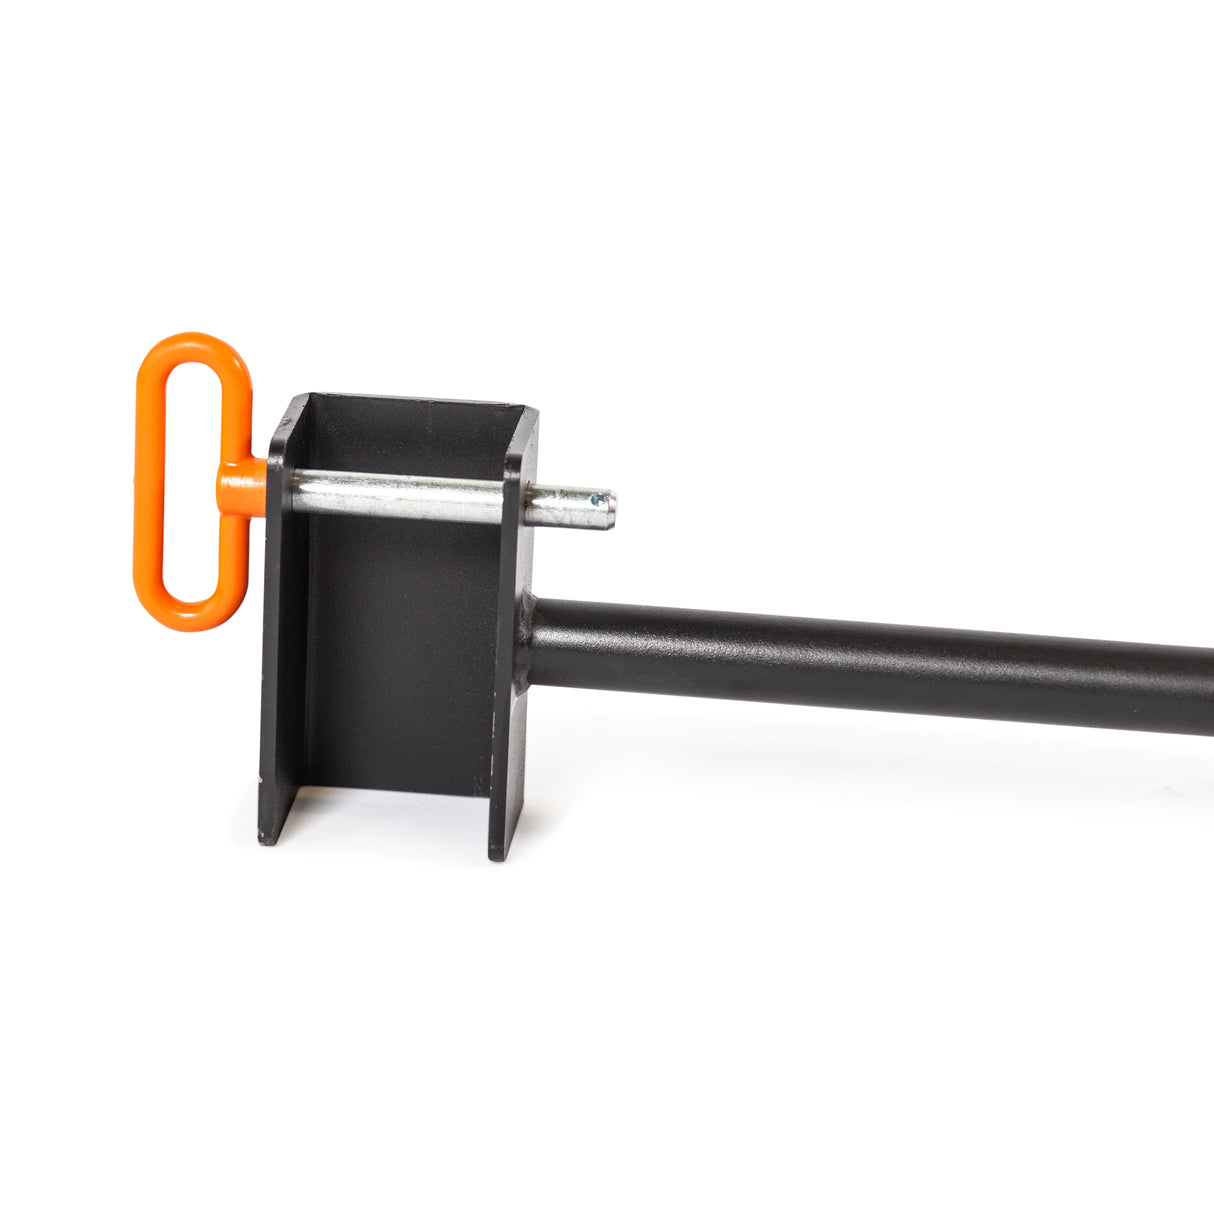 Adjustable Pull-up Bar Rack Attachment - Hydra with pin